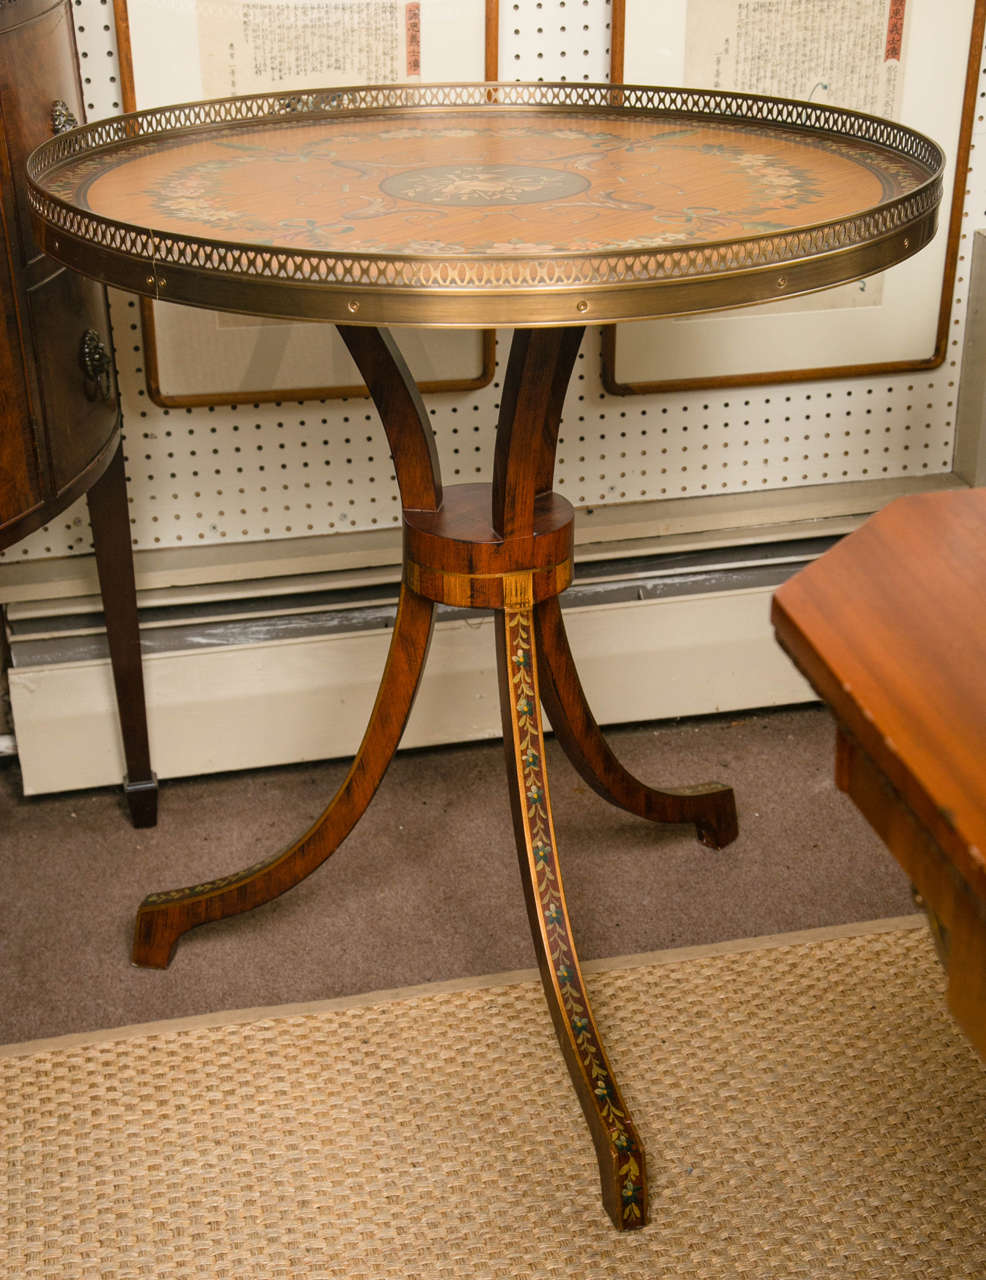 This table has a brass gallery surrounding the top. The background of the paint decoration of flowers, arabesques, and central musical instruments, is also faux bois paint. Each leg is similarly painted.
Under the top is the label for Chelsea